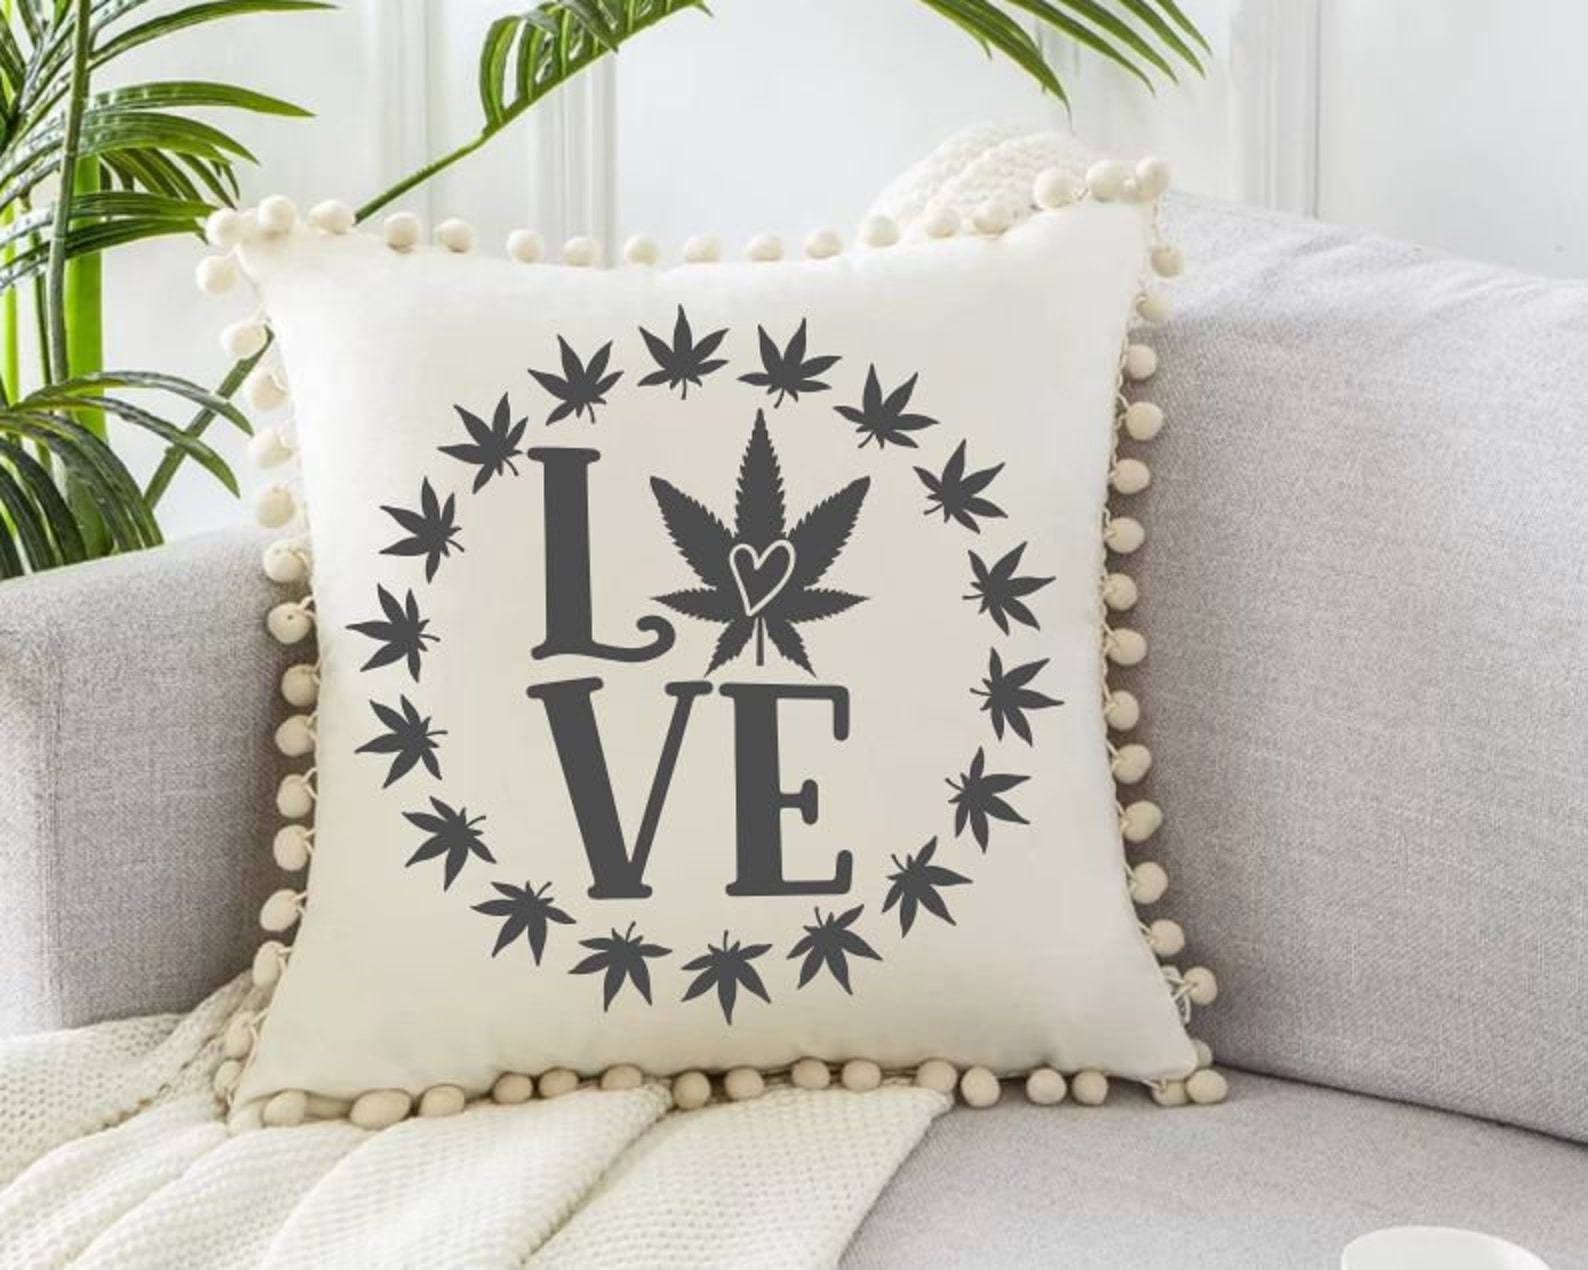 Decorate pillow with weed print.